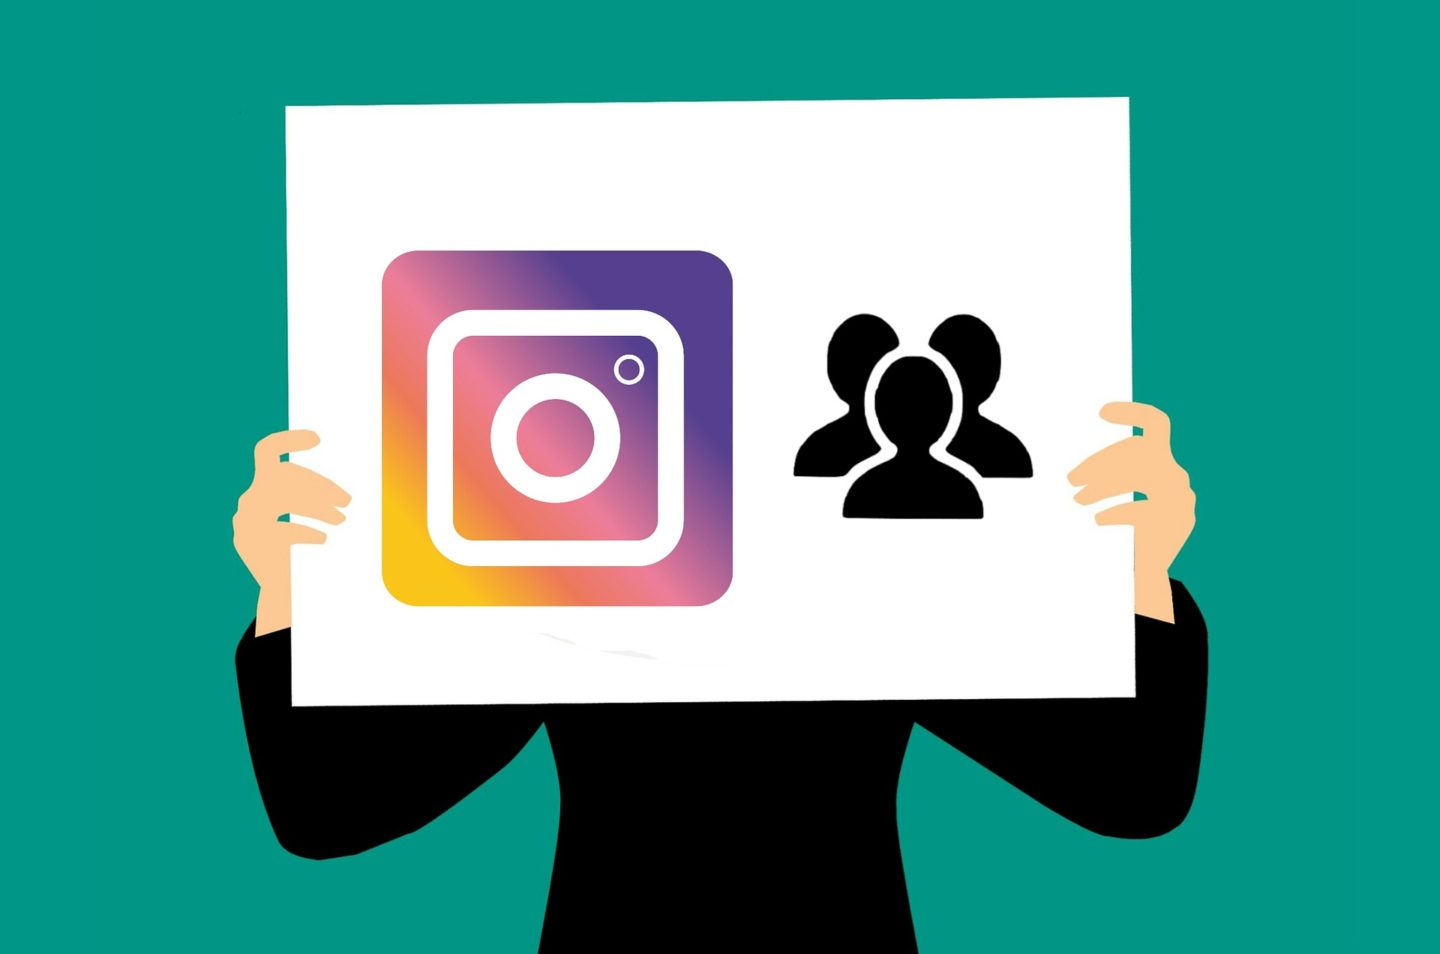 Instagram illustration, Instagram icon with followers icon being held up on a sign drawn